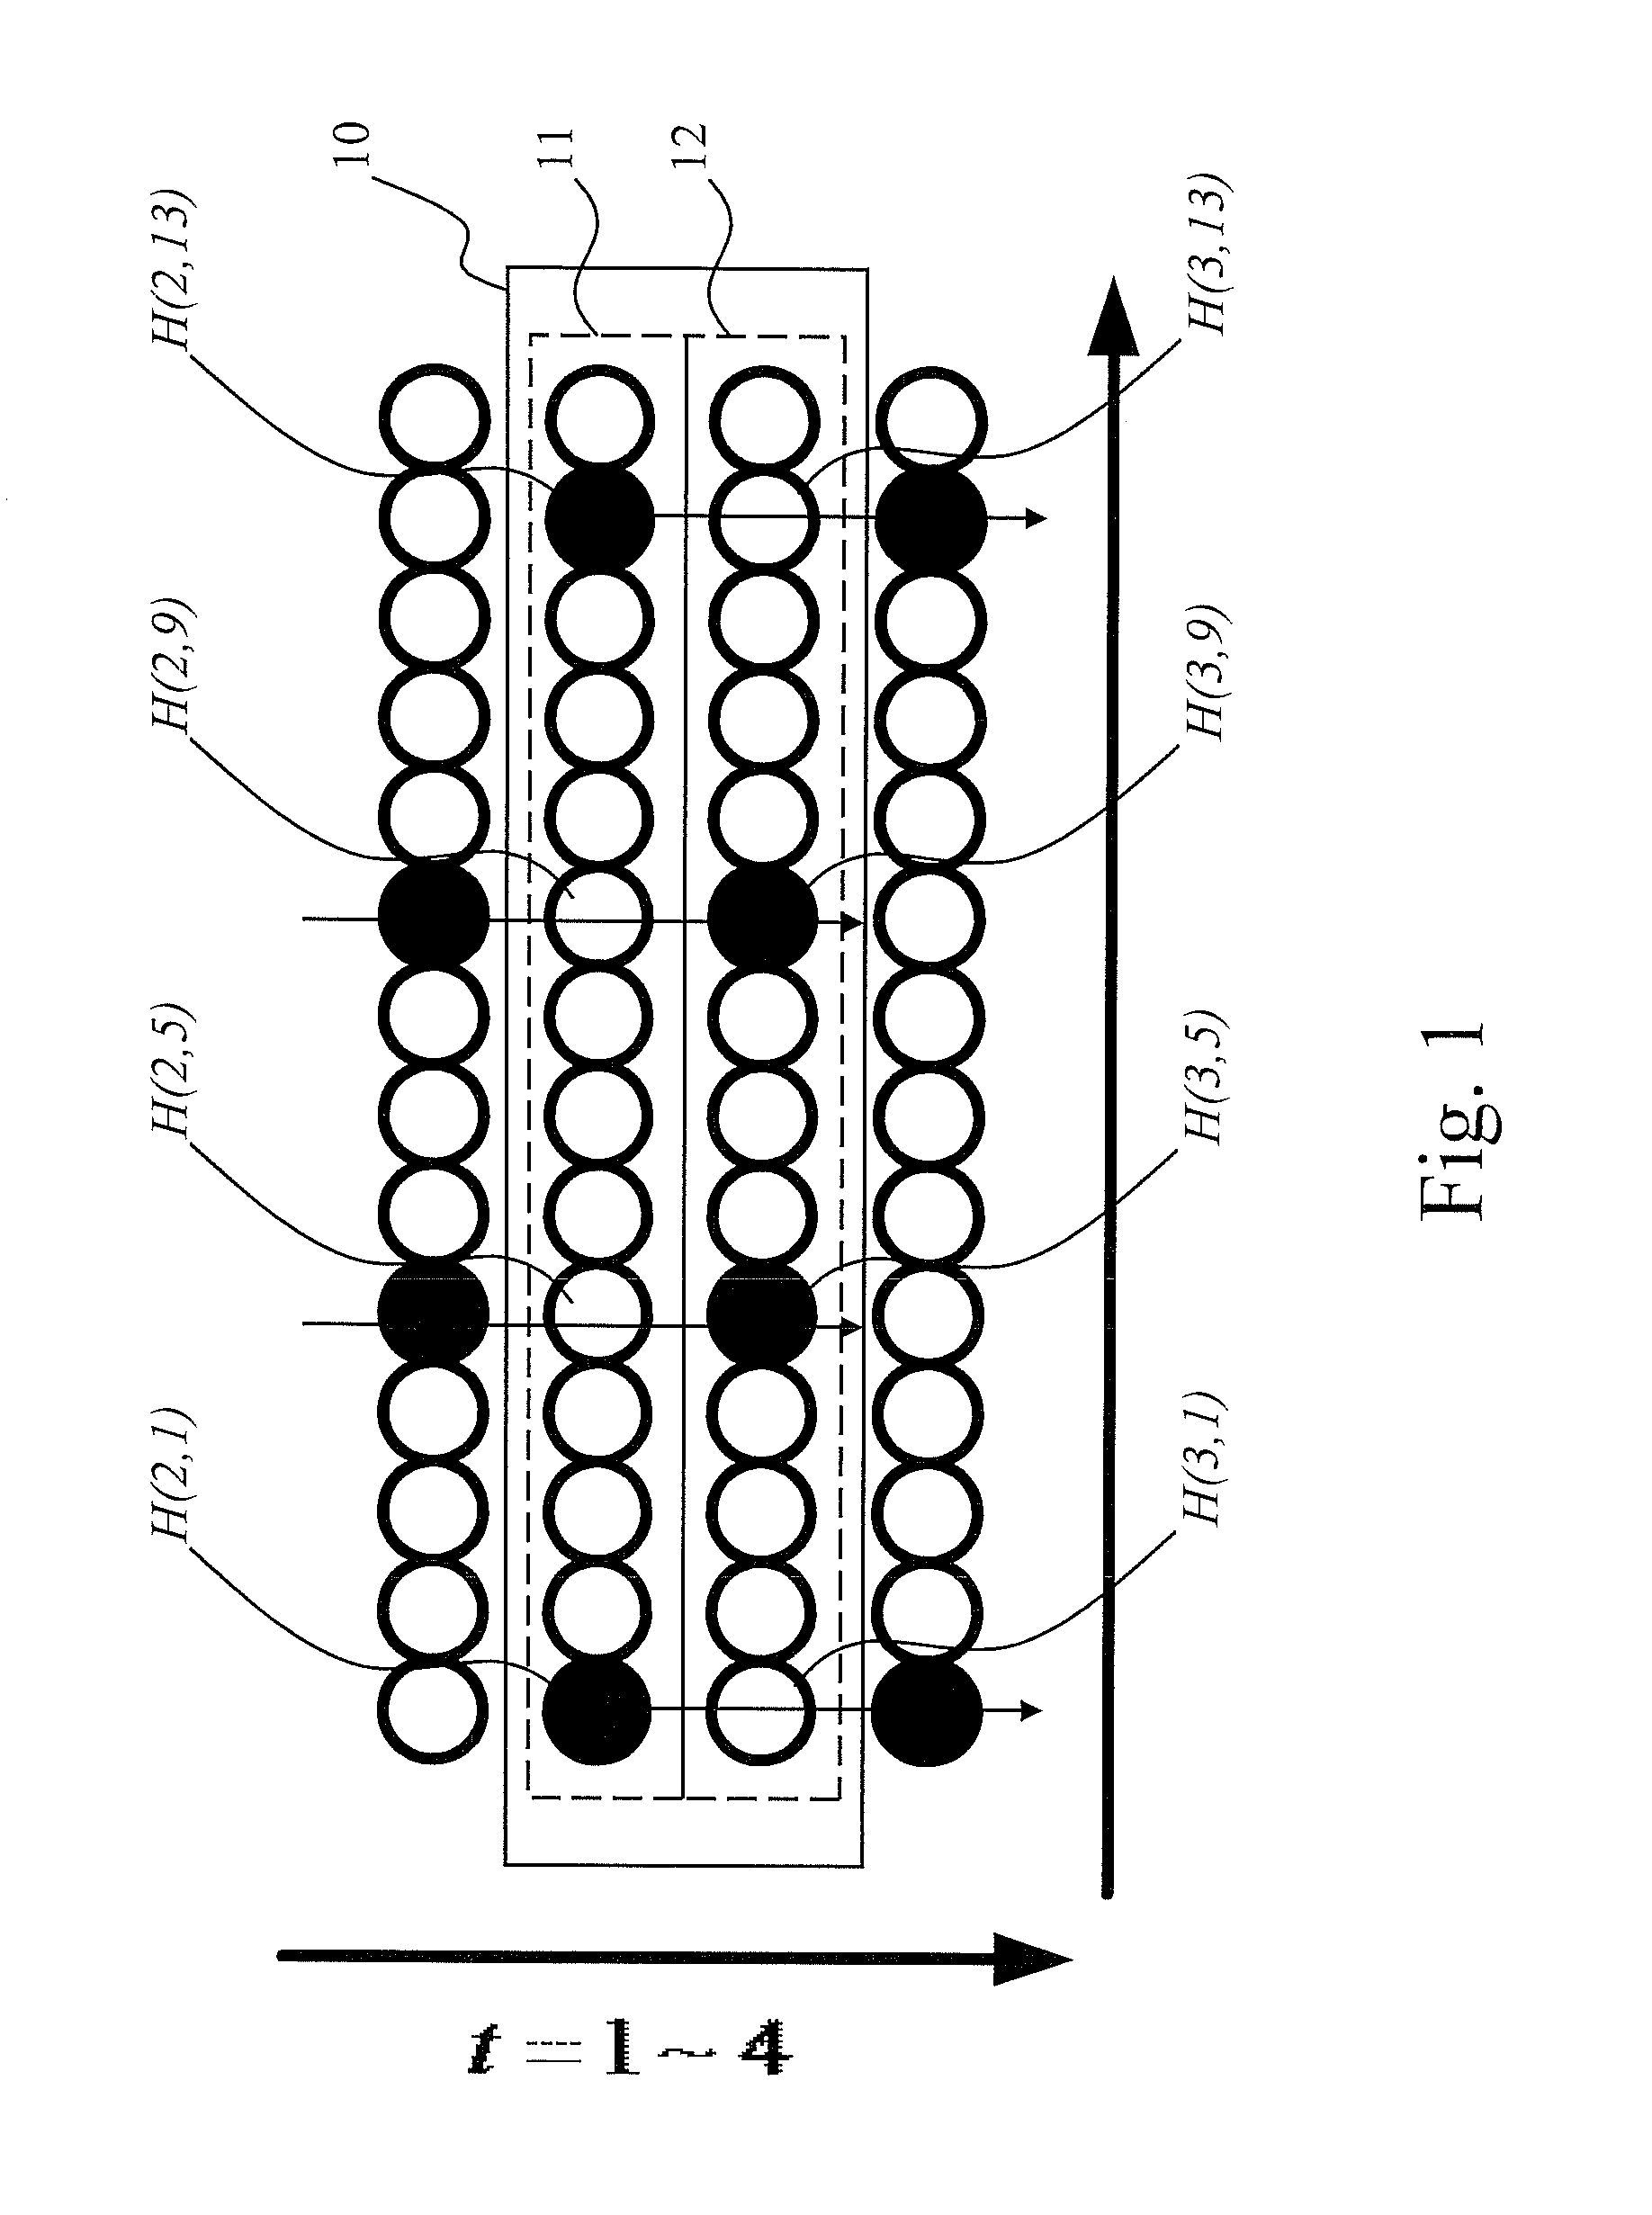 Method for OFDM and ofdma channel estimation